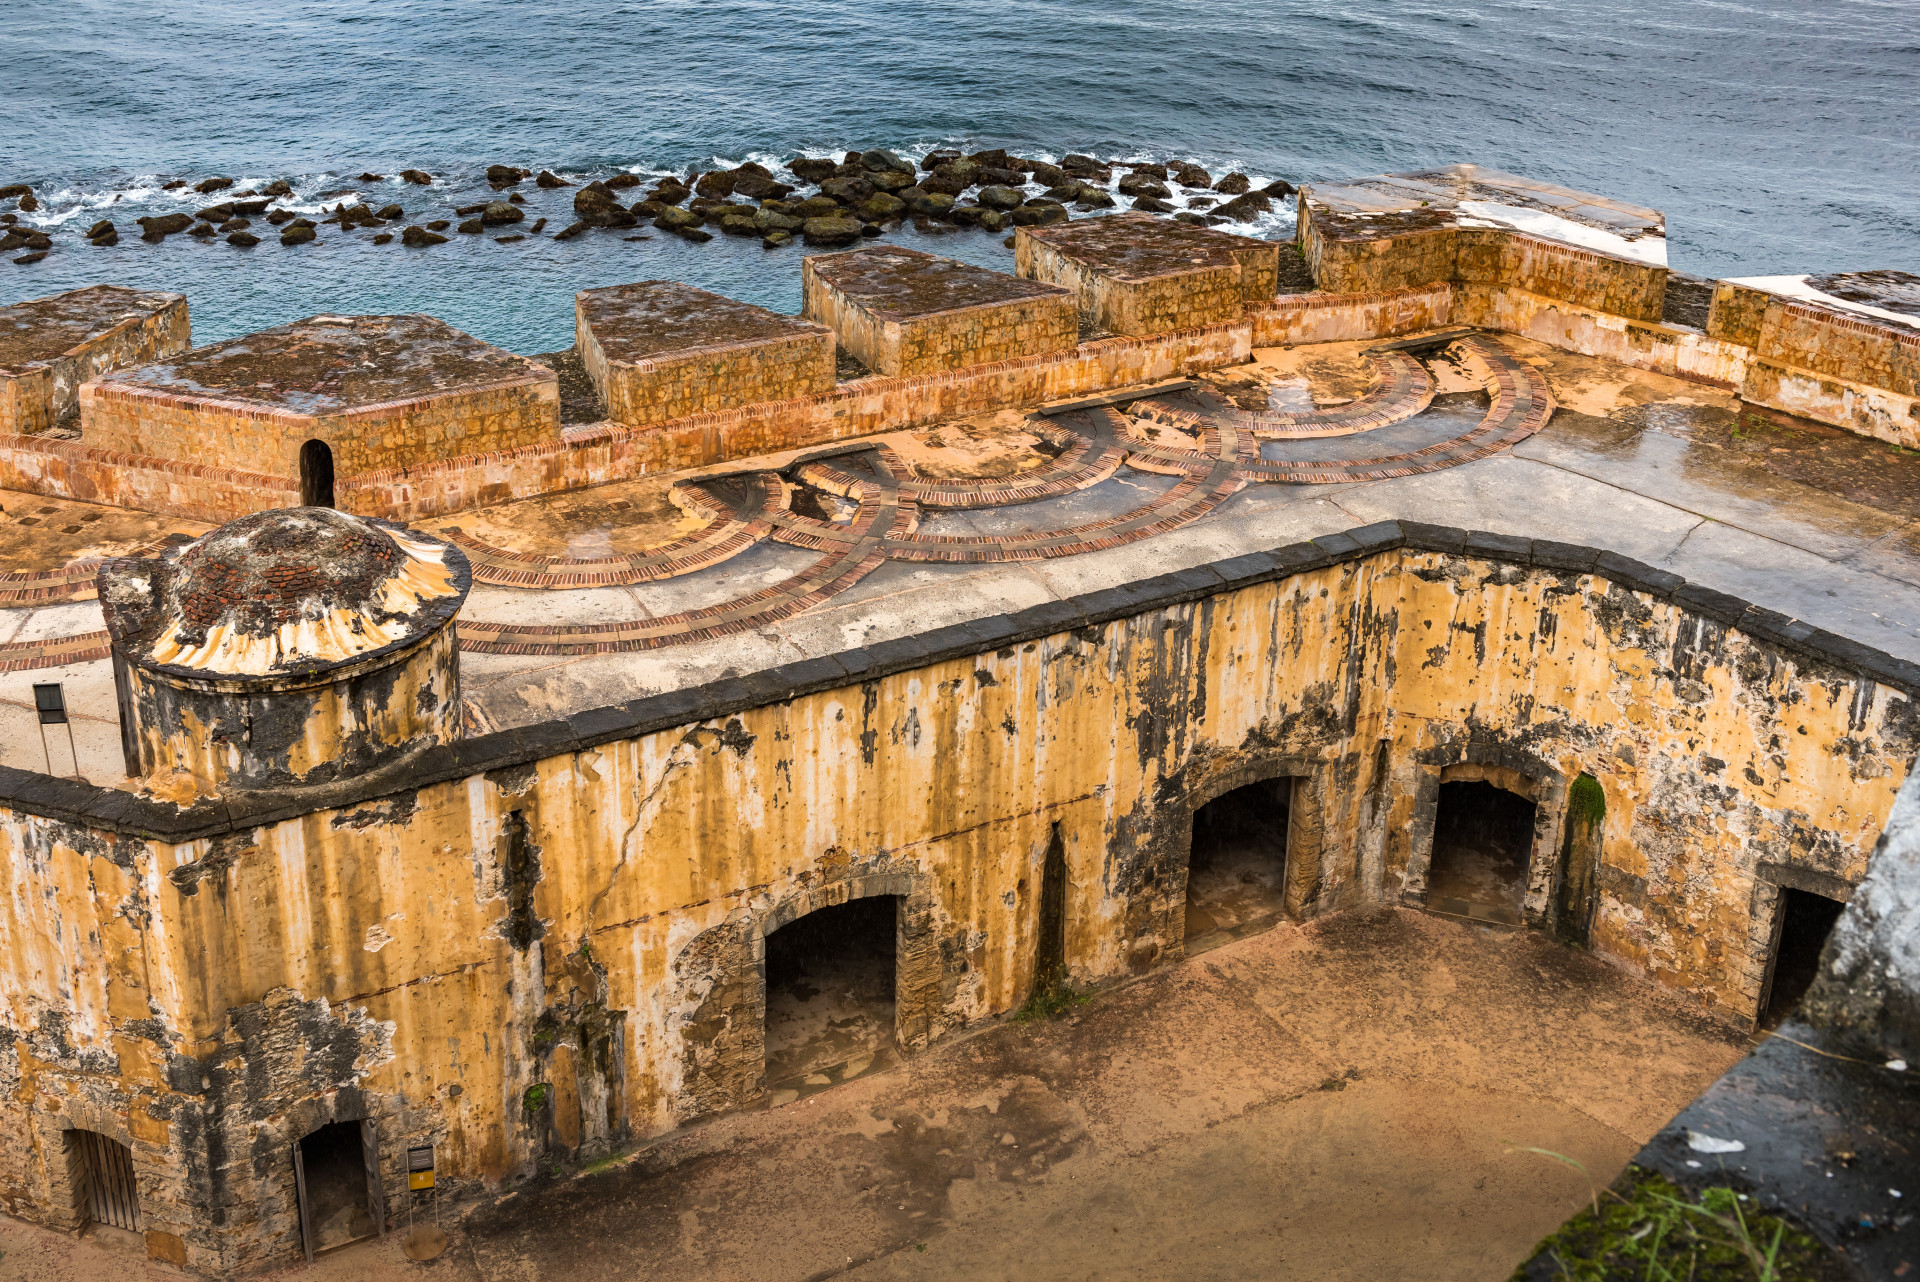 Located in San Juan, this 16th-century citadel has stood the test of time. This is the perfect way to imagine what the Spaniards saw when they first arrived in Puerto Rico.<p>You may also like:<a href="https://www.starsinsider.com/n/160140?utm_source=msn.com&utm_medium=display&utm_campaign=referral_description&utm_content=173131en-us"> The most epic celebrity falls ever</a></p>